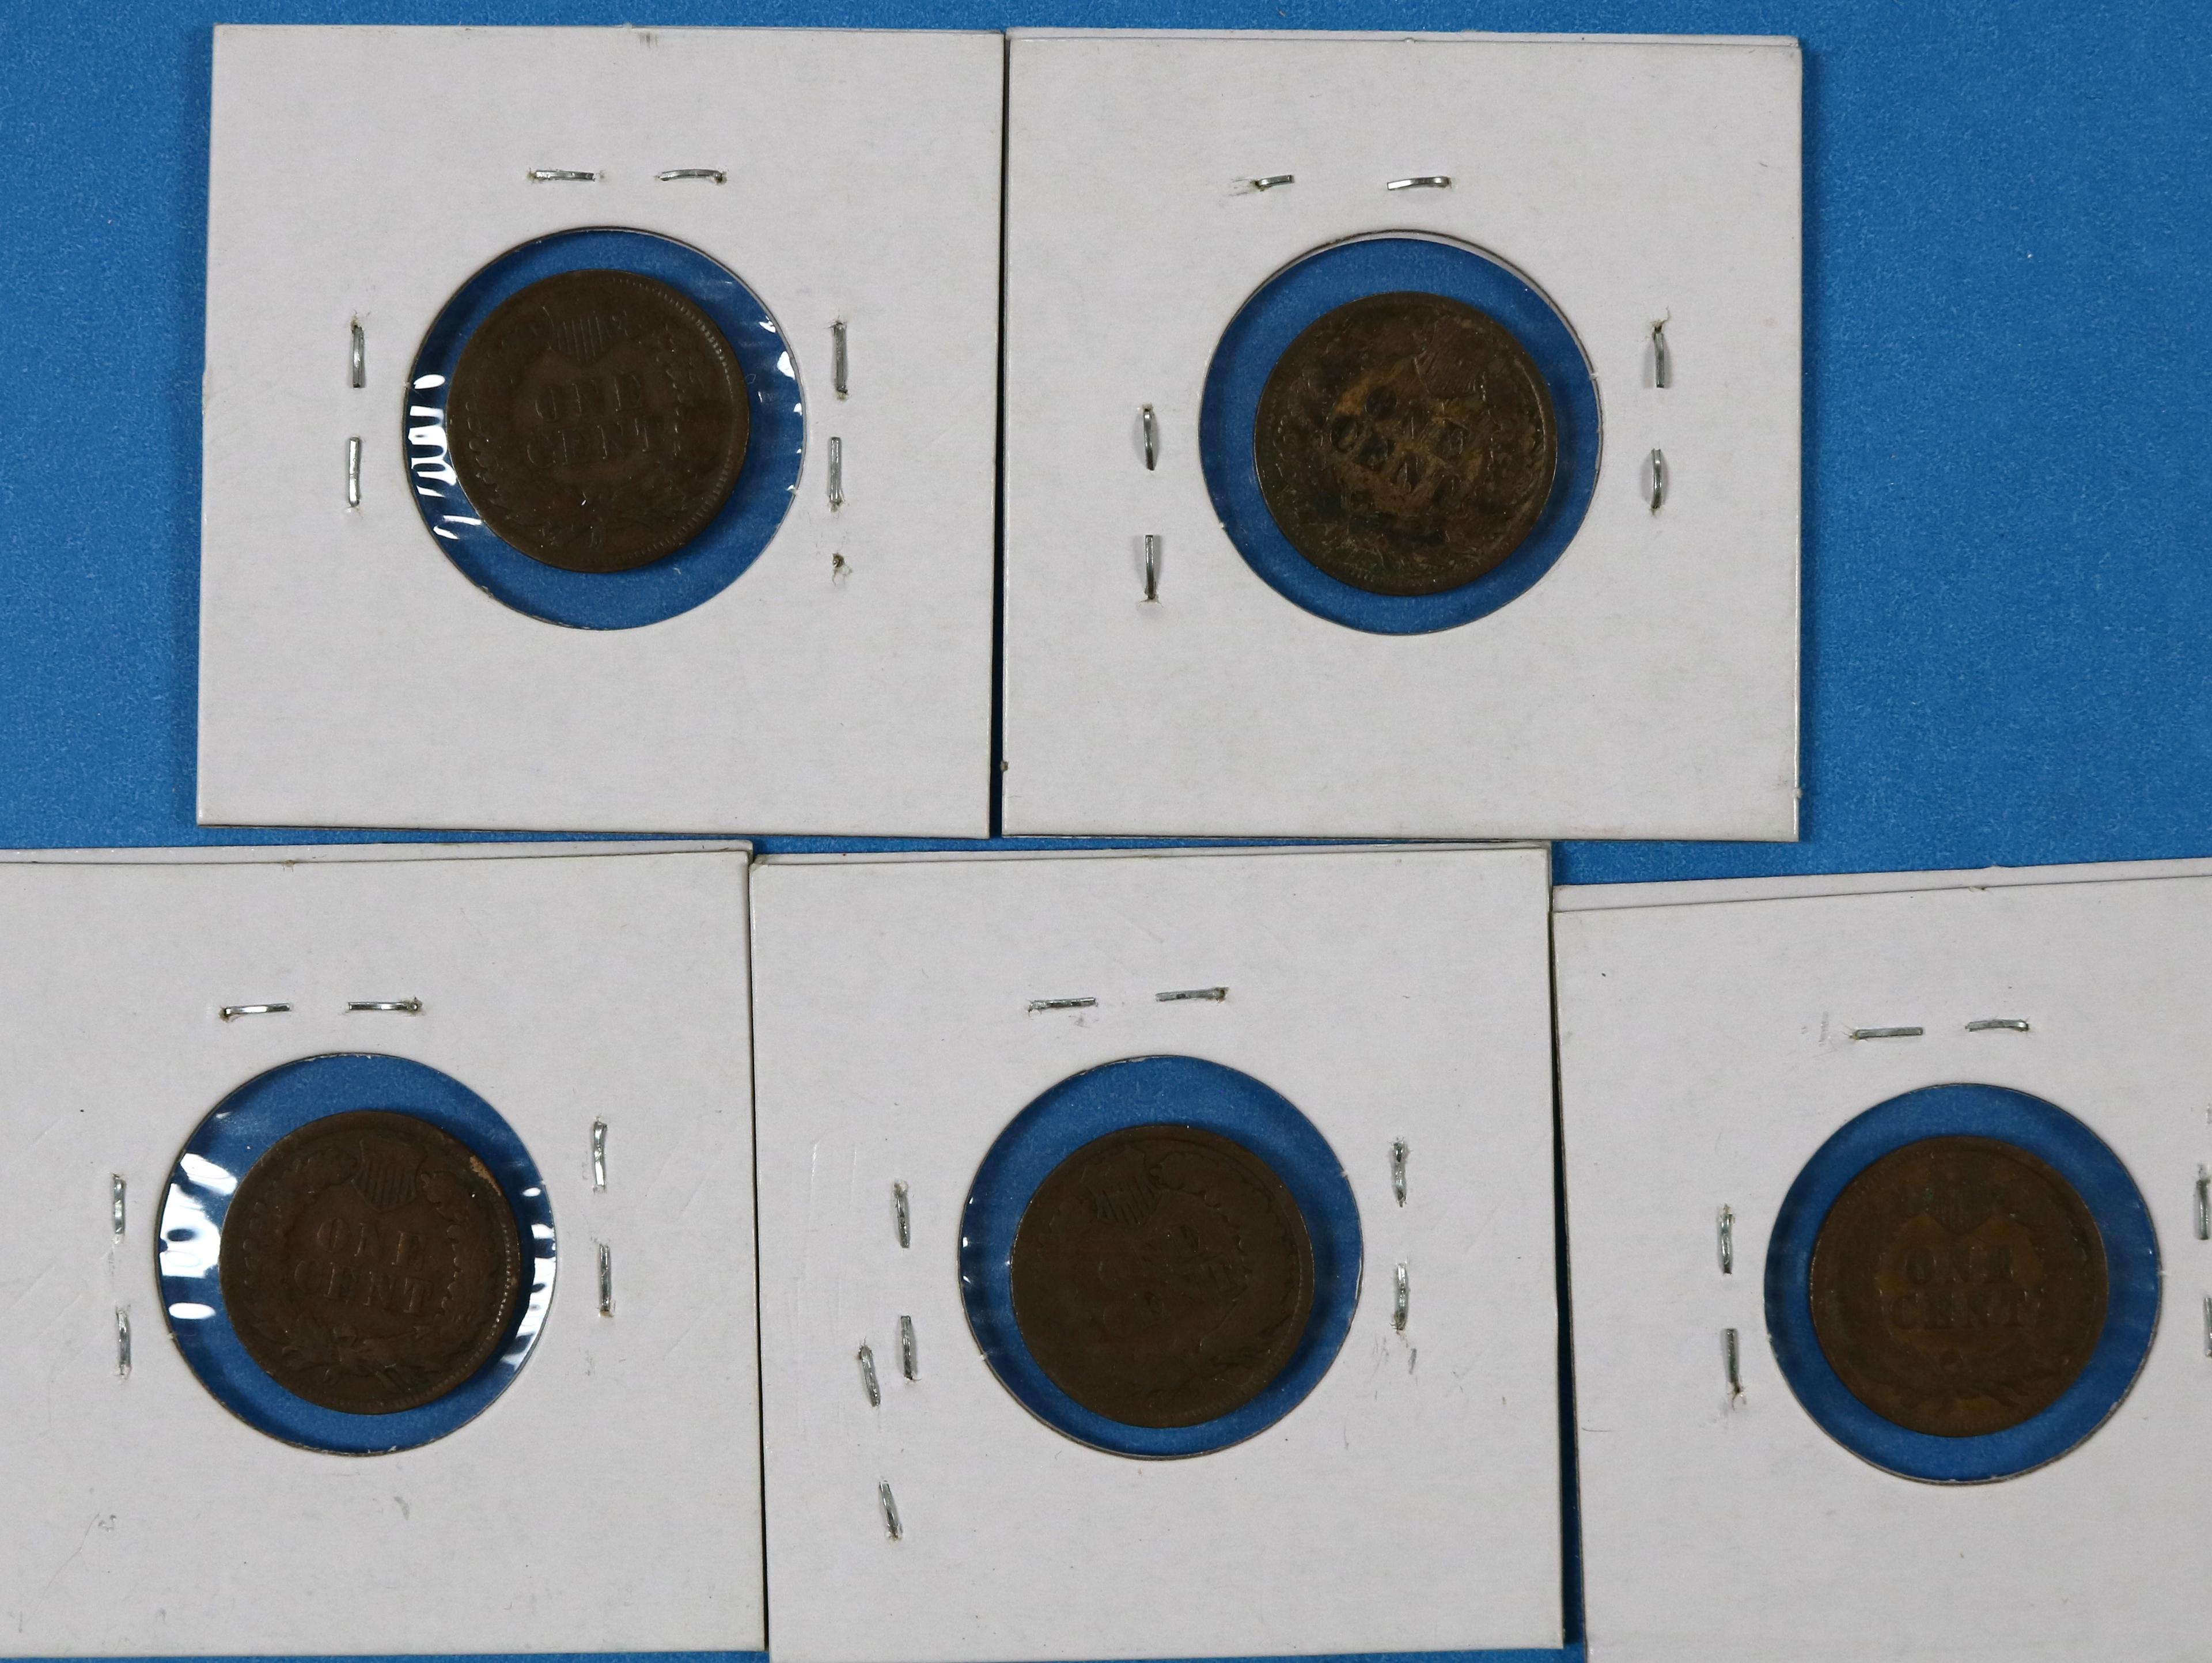 Lot of 5 Indian Head Pennies 1899, 1900, 1901, 1902, 1903